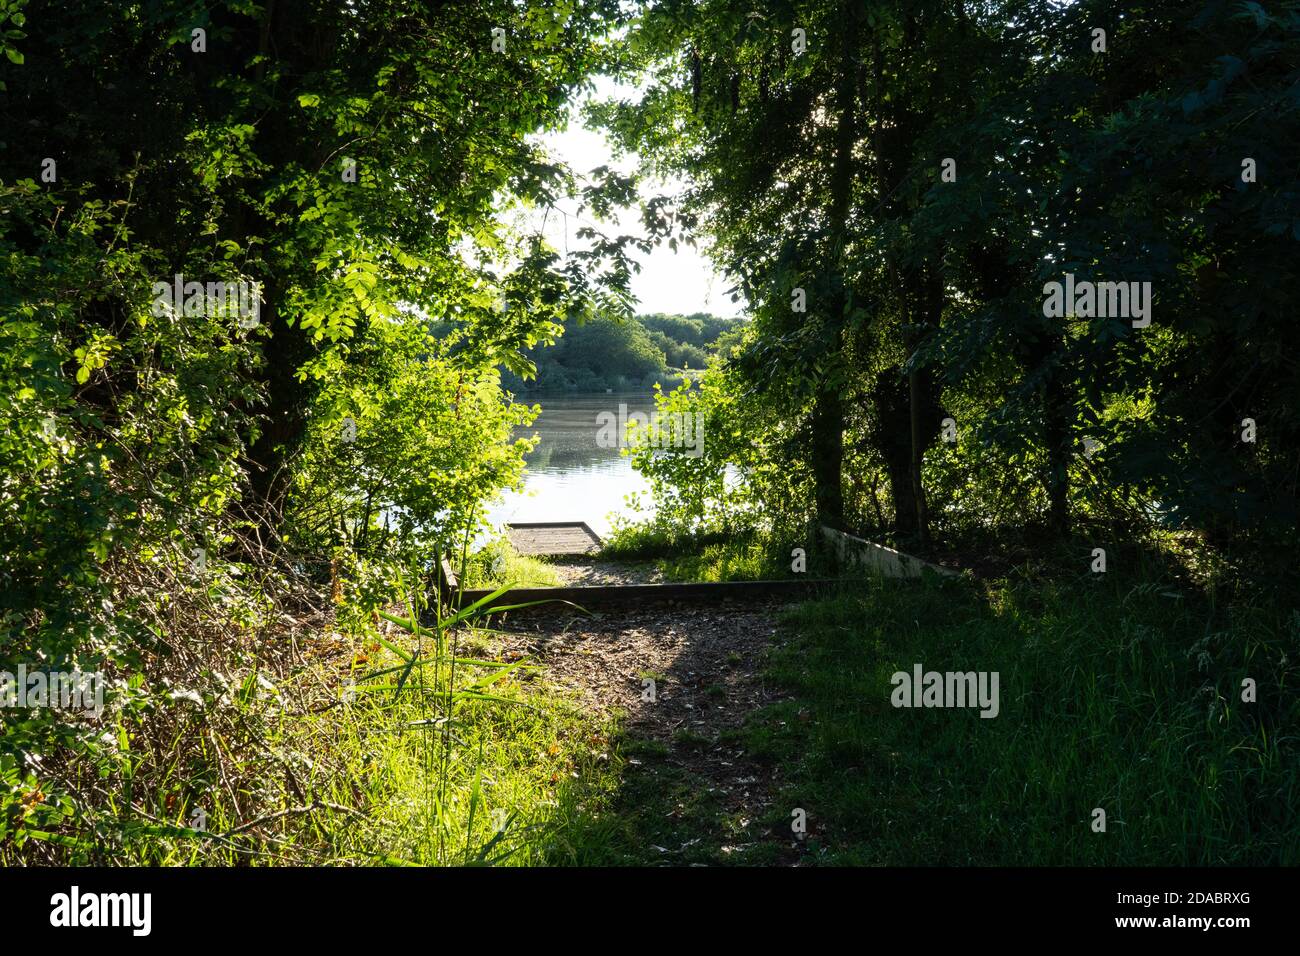 Fisherman’s platform next to backlit trees in still water fishing lake at in summer Stock Photo